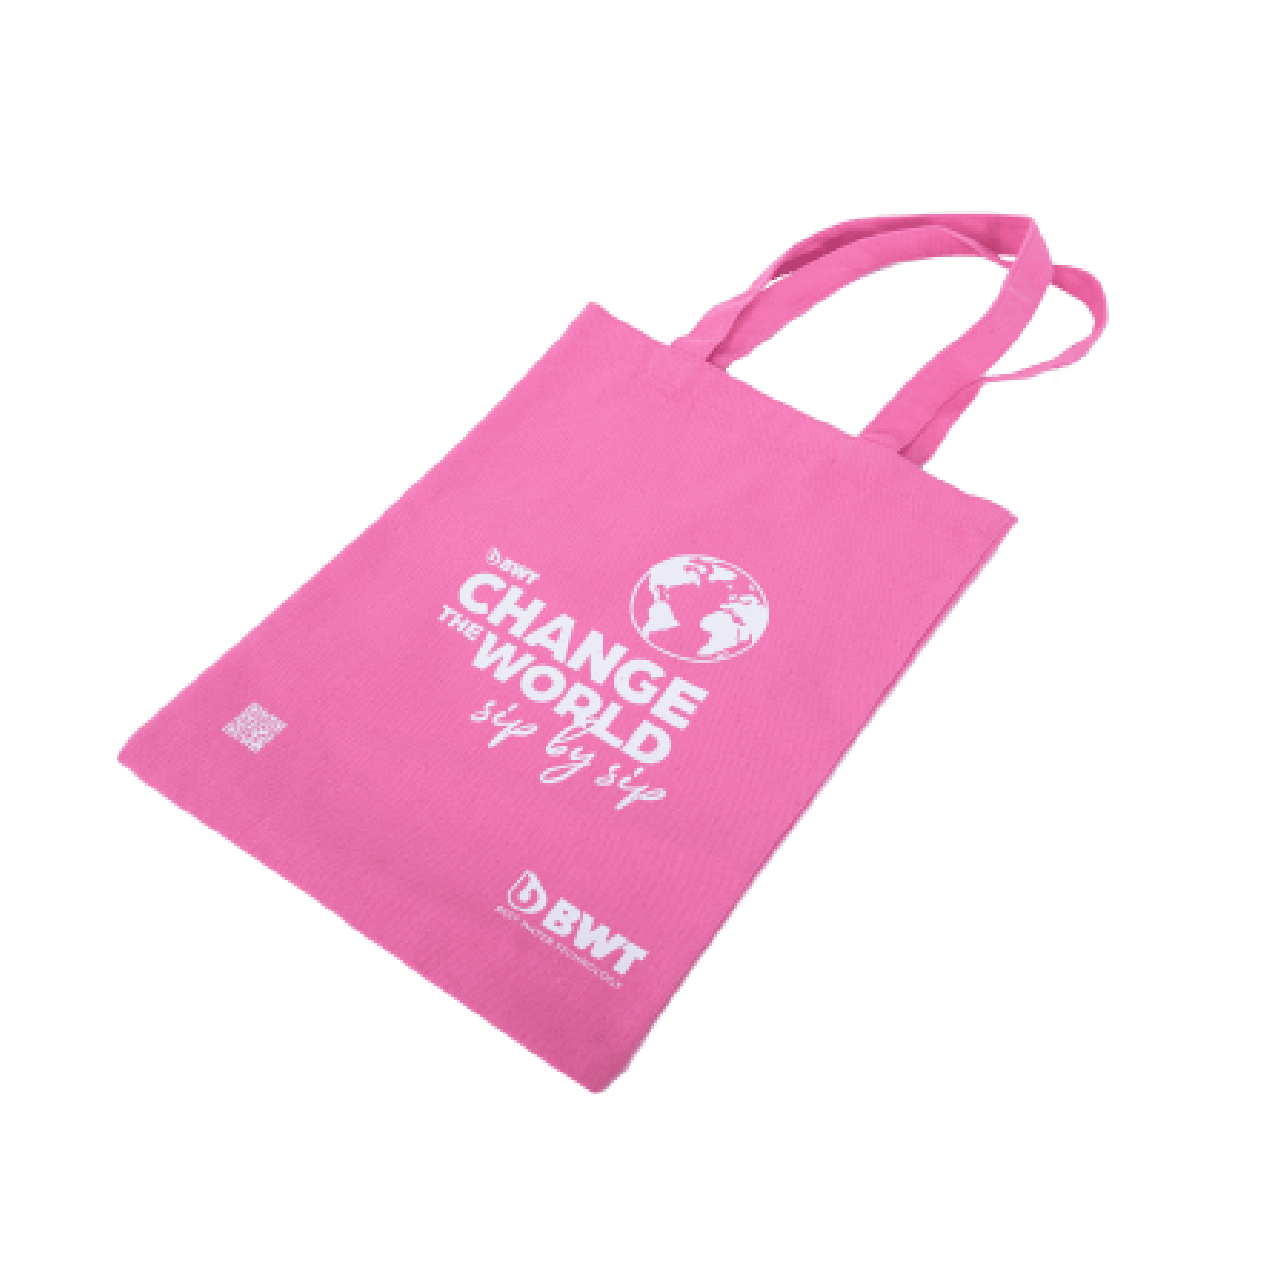 BWT Change the World cotton bag in pink